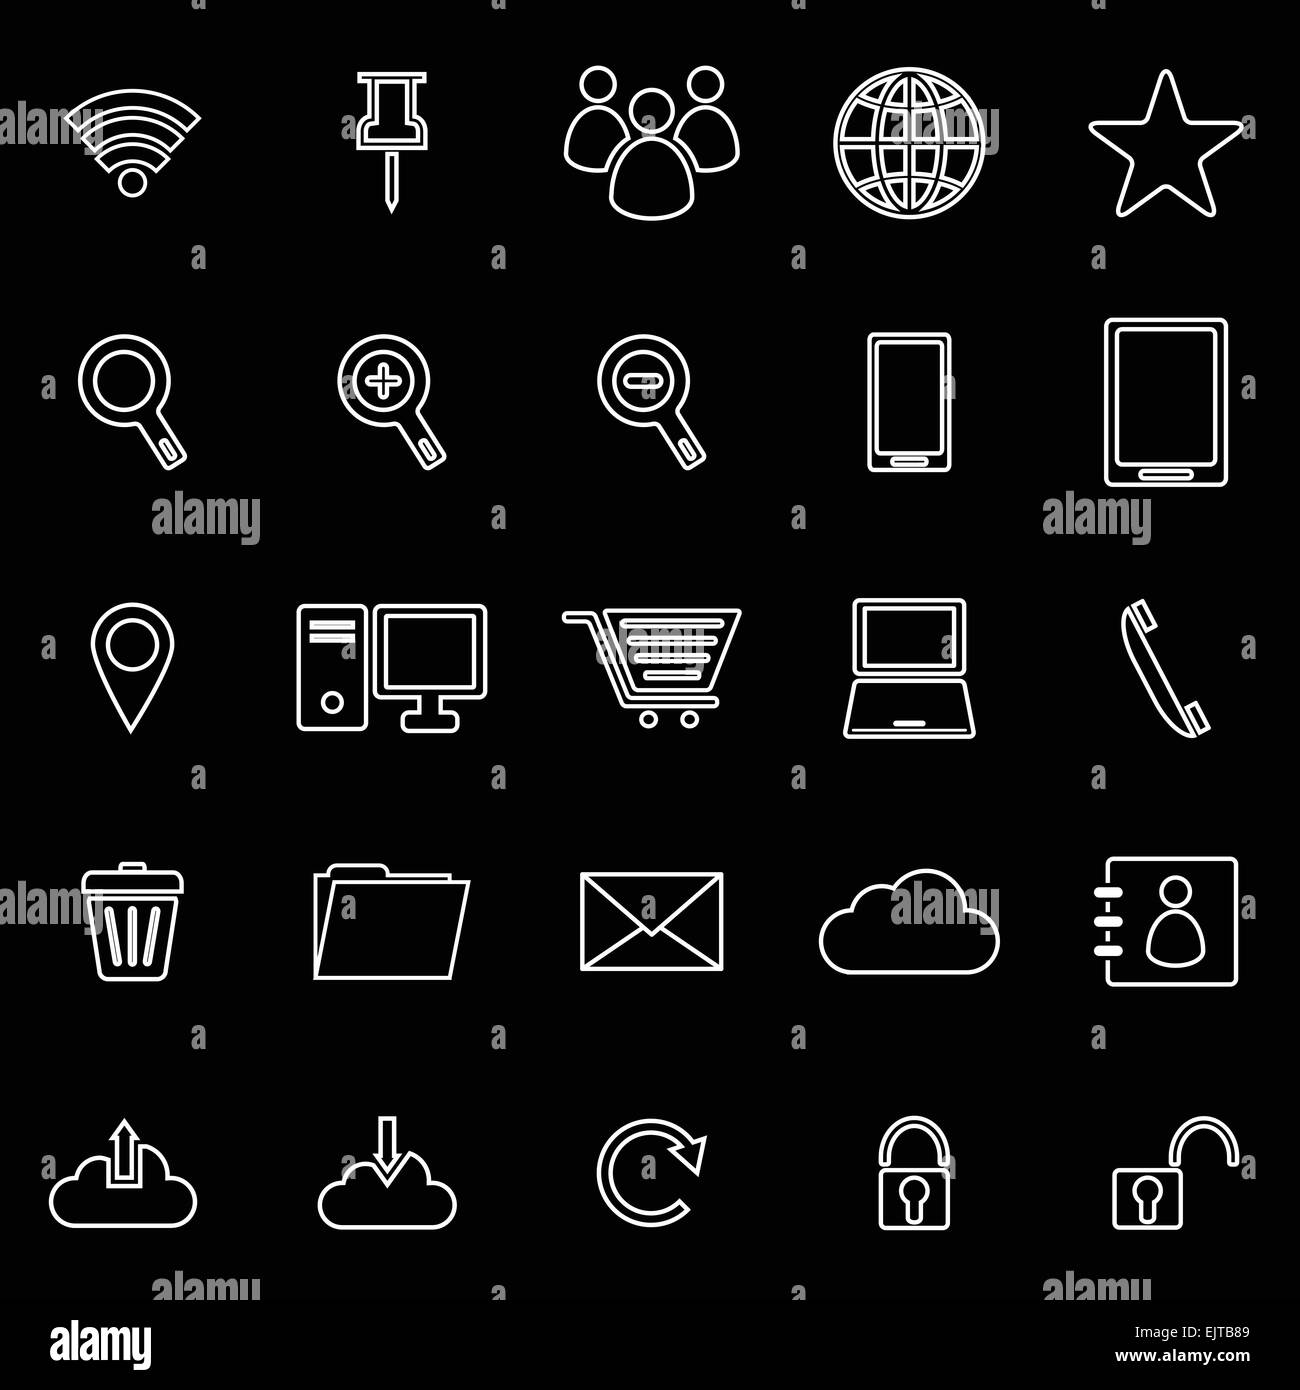 Internet line icons on black background, stock vector Stock Vector